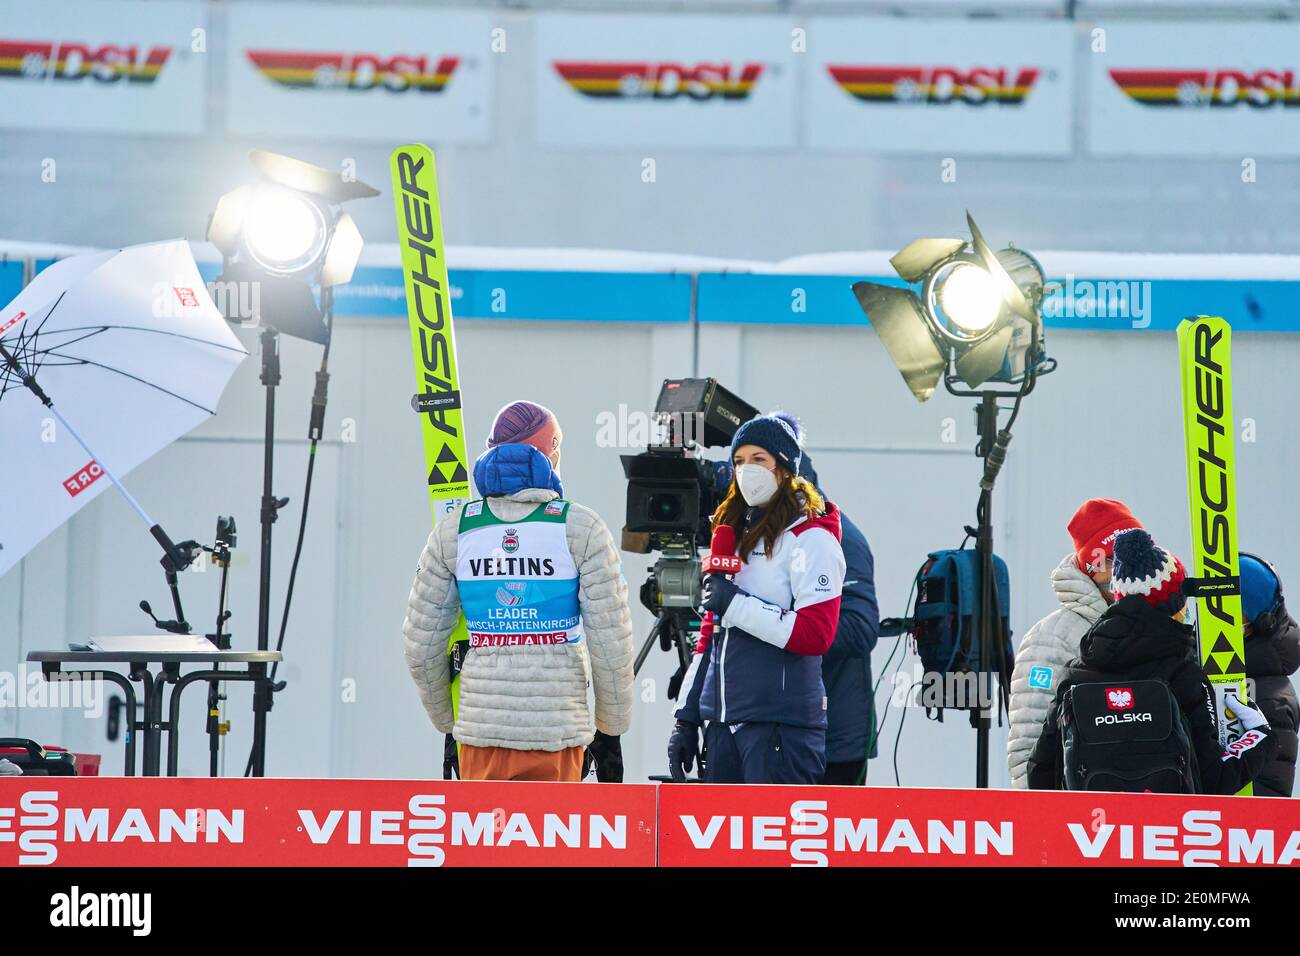 Karl GEIGER, GER interview with ORF, Austria TV at the Four Hills Tournament Ski Jumping at Olympic Stadium, Grosse Olympiaschanze in Garmisch-Partenkirchen, Bavaria, Germany, January 01, 2021.  © Peter Schatz / Alamy Live News Stock Photo